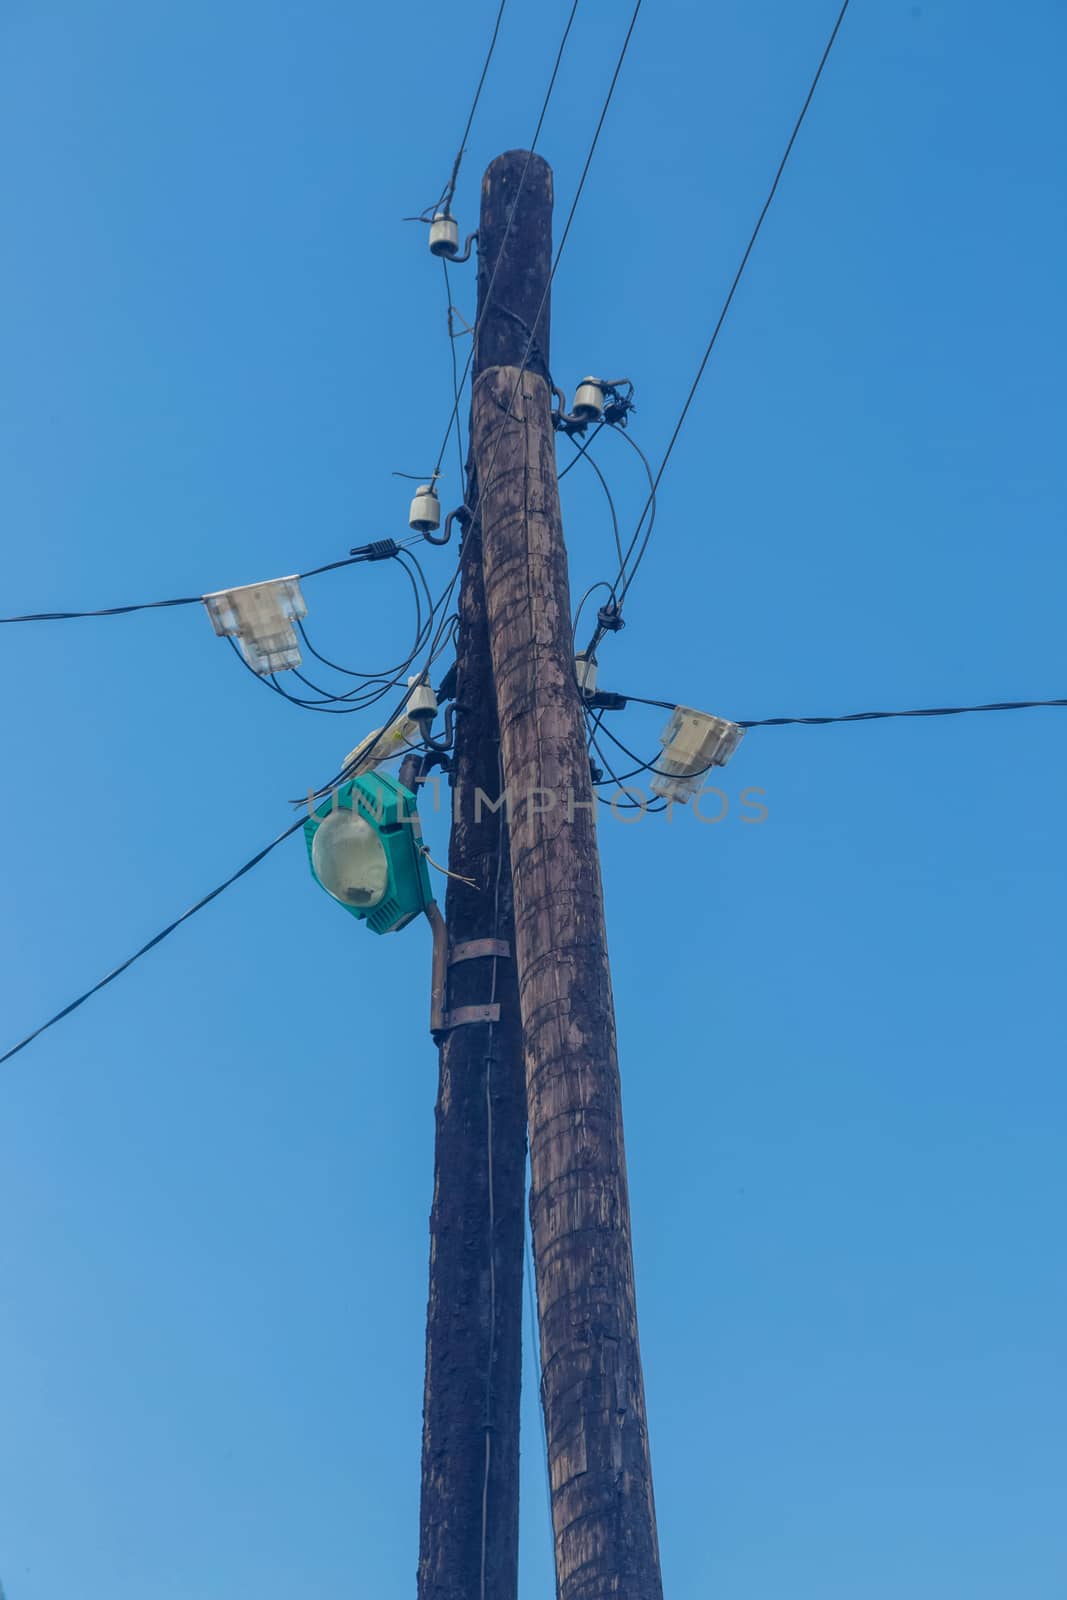 Electric pole with lamps and wires against Blue Sky by galinasharapova